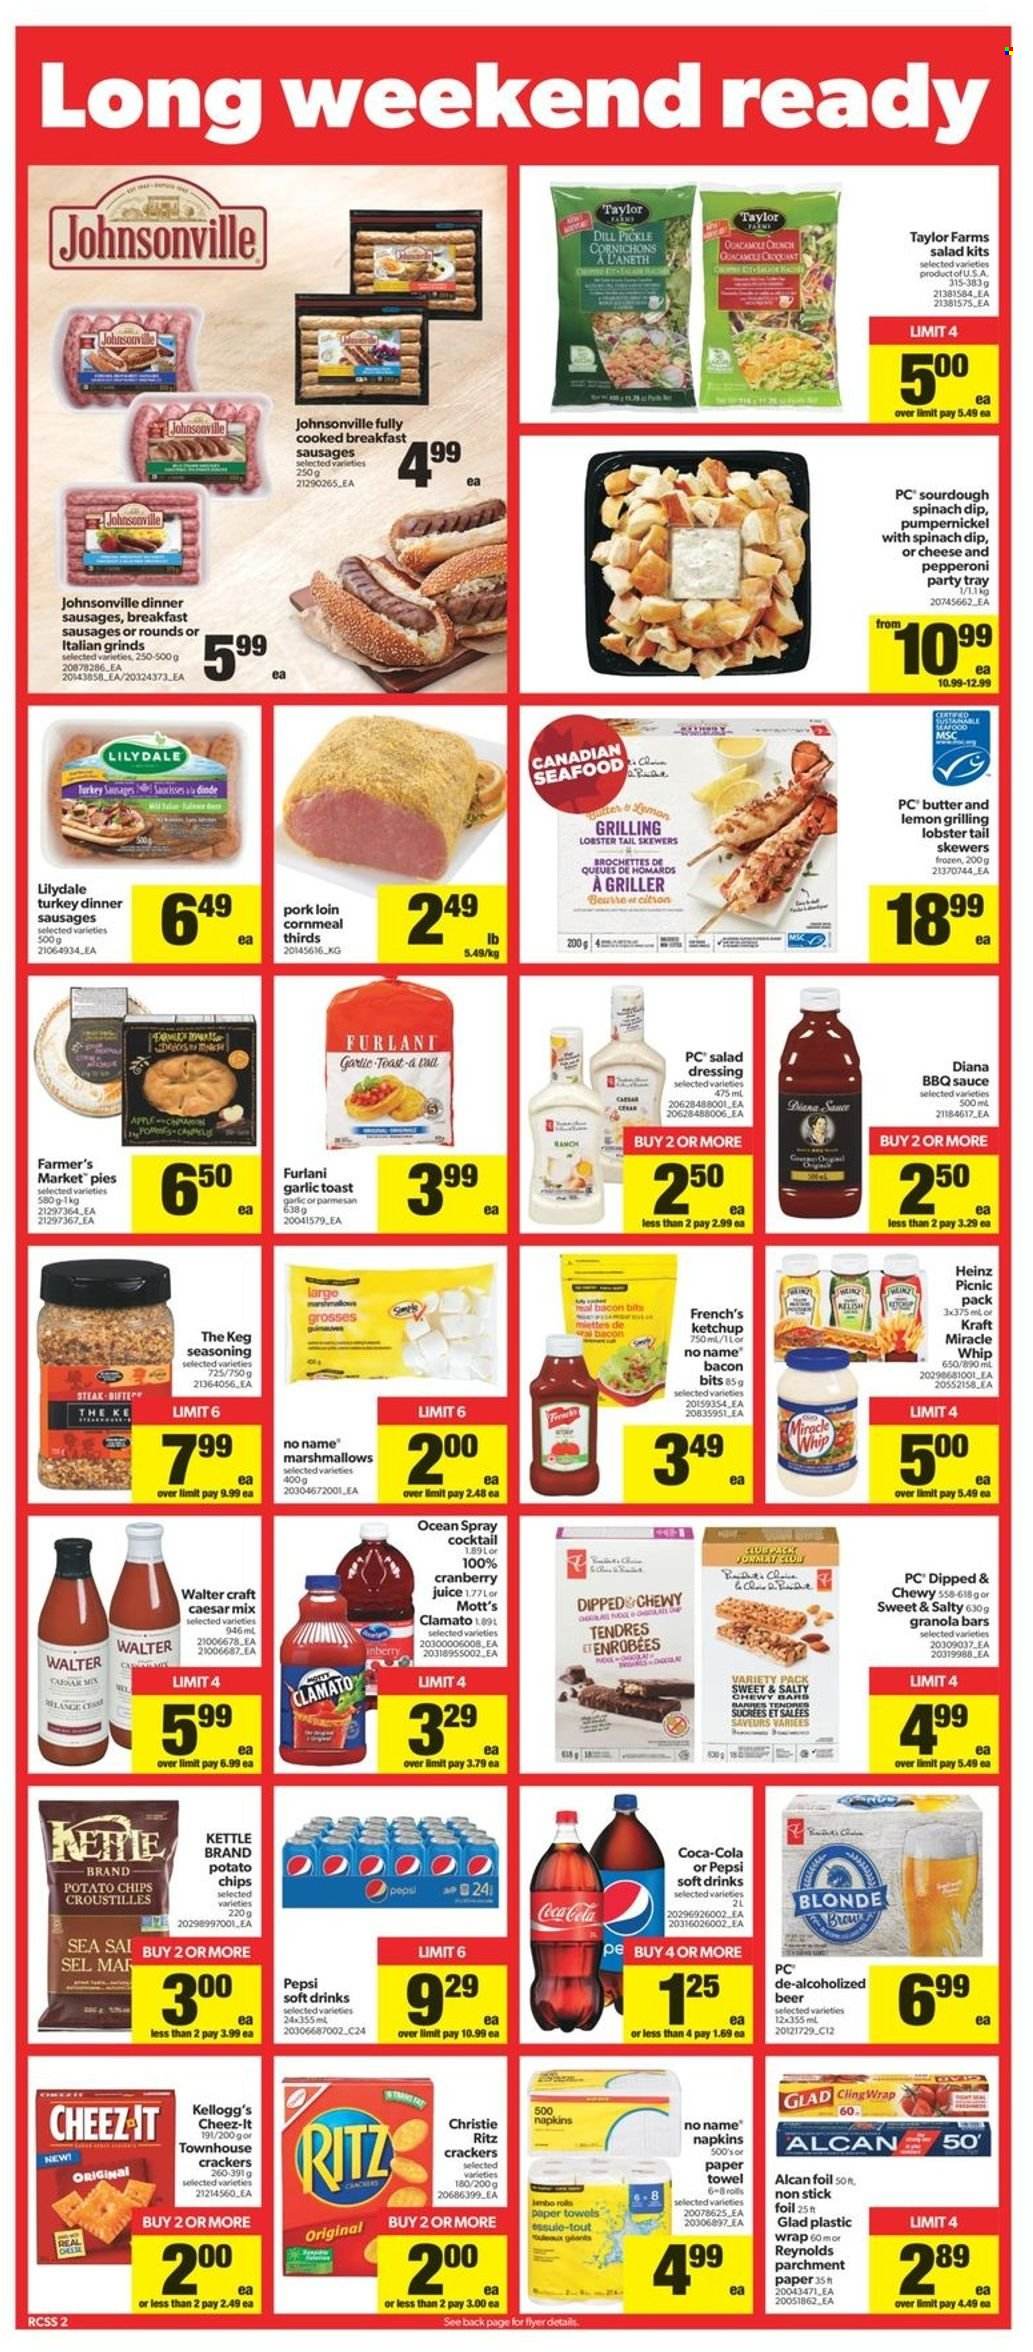 thumbnail - Real Canadian Superstore Flyer - May 12, 2022 - May 18, 2022 - Sales products - Mott's, lobster, seafood, lobster tail, No Name, sauce, Kraft®, Johnsonville, bacon bits, sausage, pepperoni, parmesan, Miracle Whip, dip, spinach dip, marshmallows, crackers, Kellogg's, RITZ, dill pickle, potato chips, chips, Cheez-It, granola bar, dill, spice, BBQ sauce, salad dressing, dressing, Coca-Cola, cranberry juice, Pepsi, juice, Clamato, soft drink, beer, pork loin, pork meat, napkins, kitchen towels, paper towels, clingwrap, Heinz, ketchup, steak. Page 2.